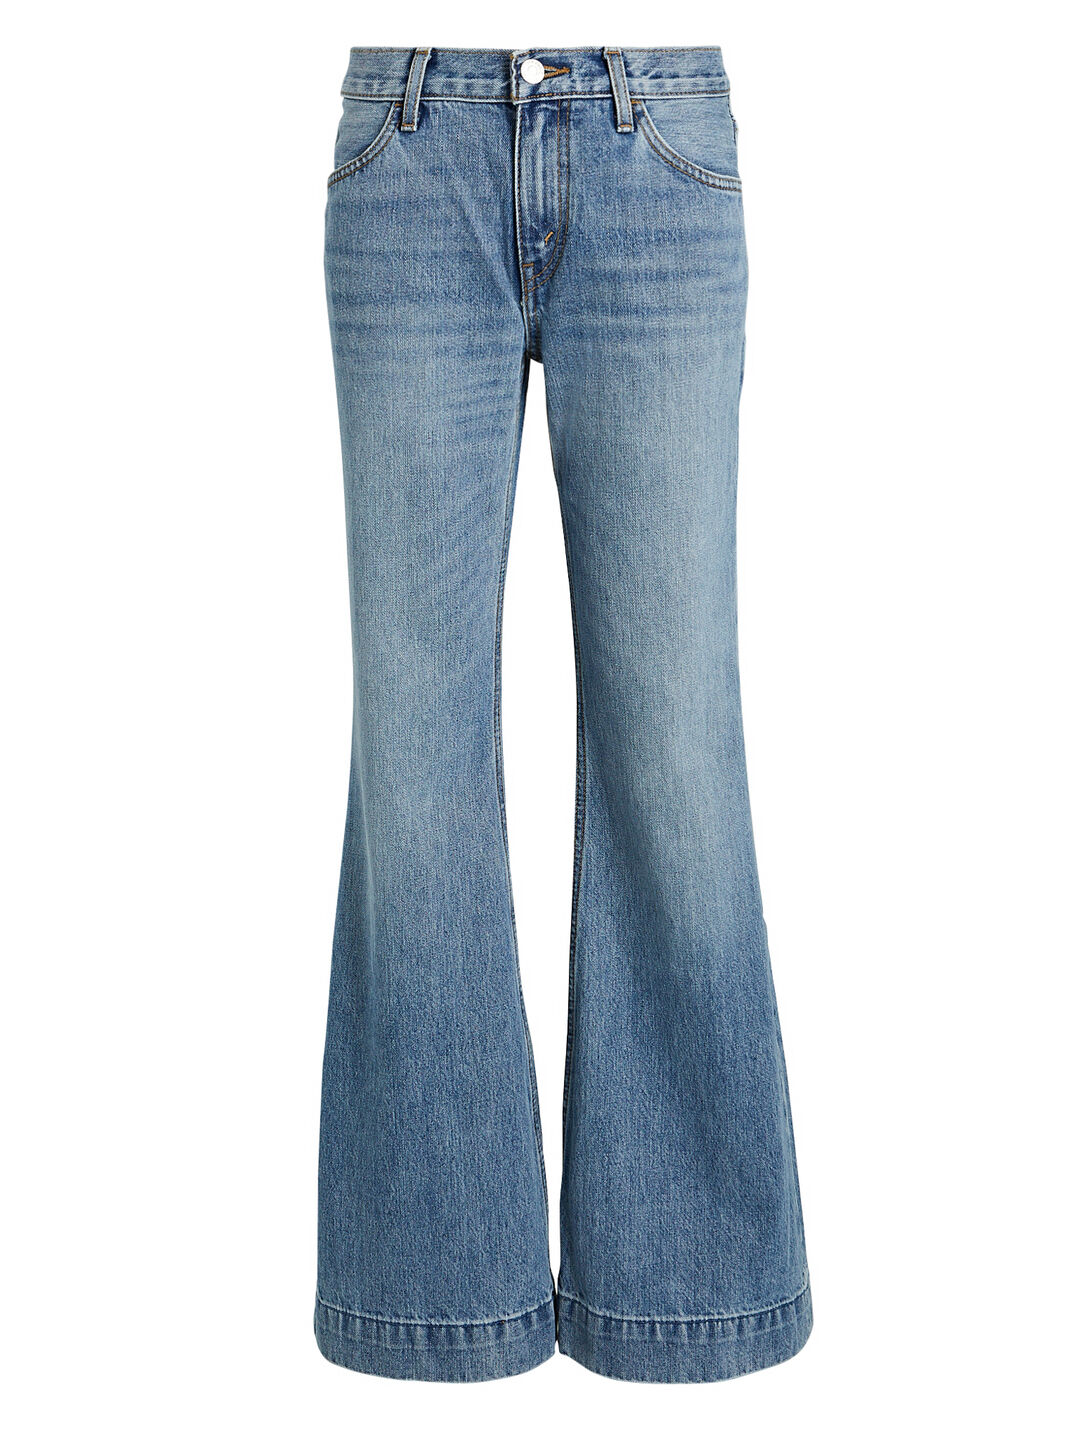 70s Low-Rise Bell Bottom Jeans